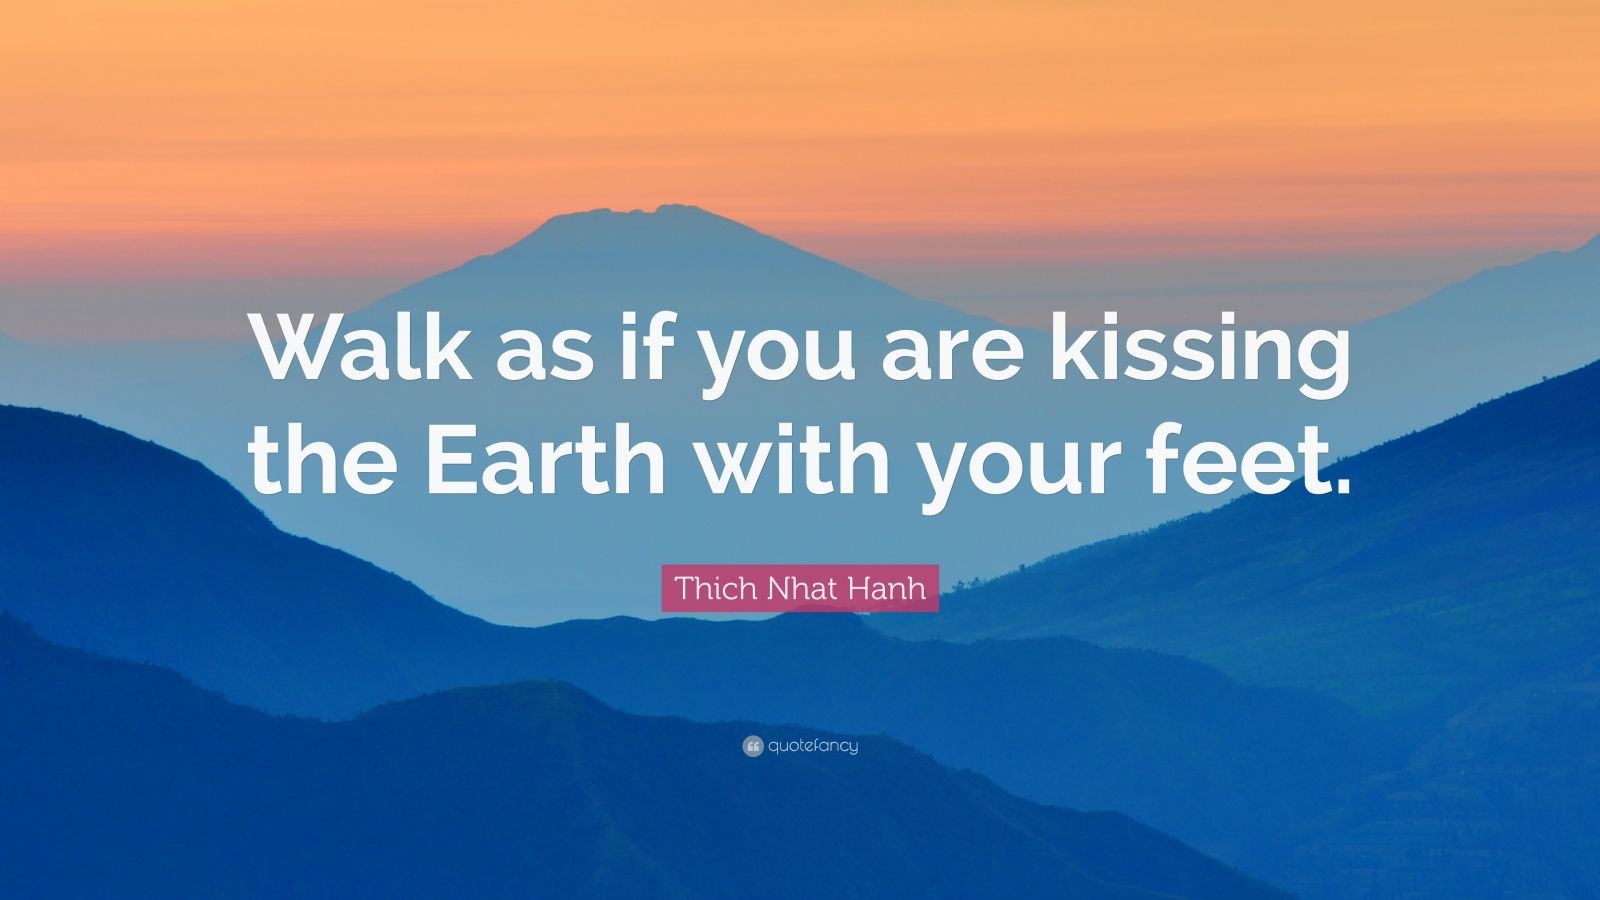 Thich Nhat Hanh Quotes (372 wallpapers) - Quotefancy